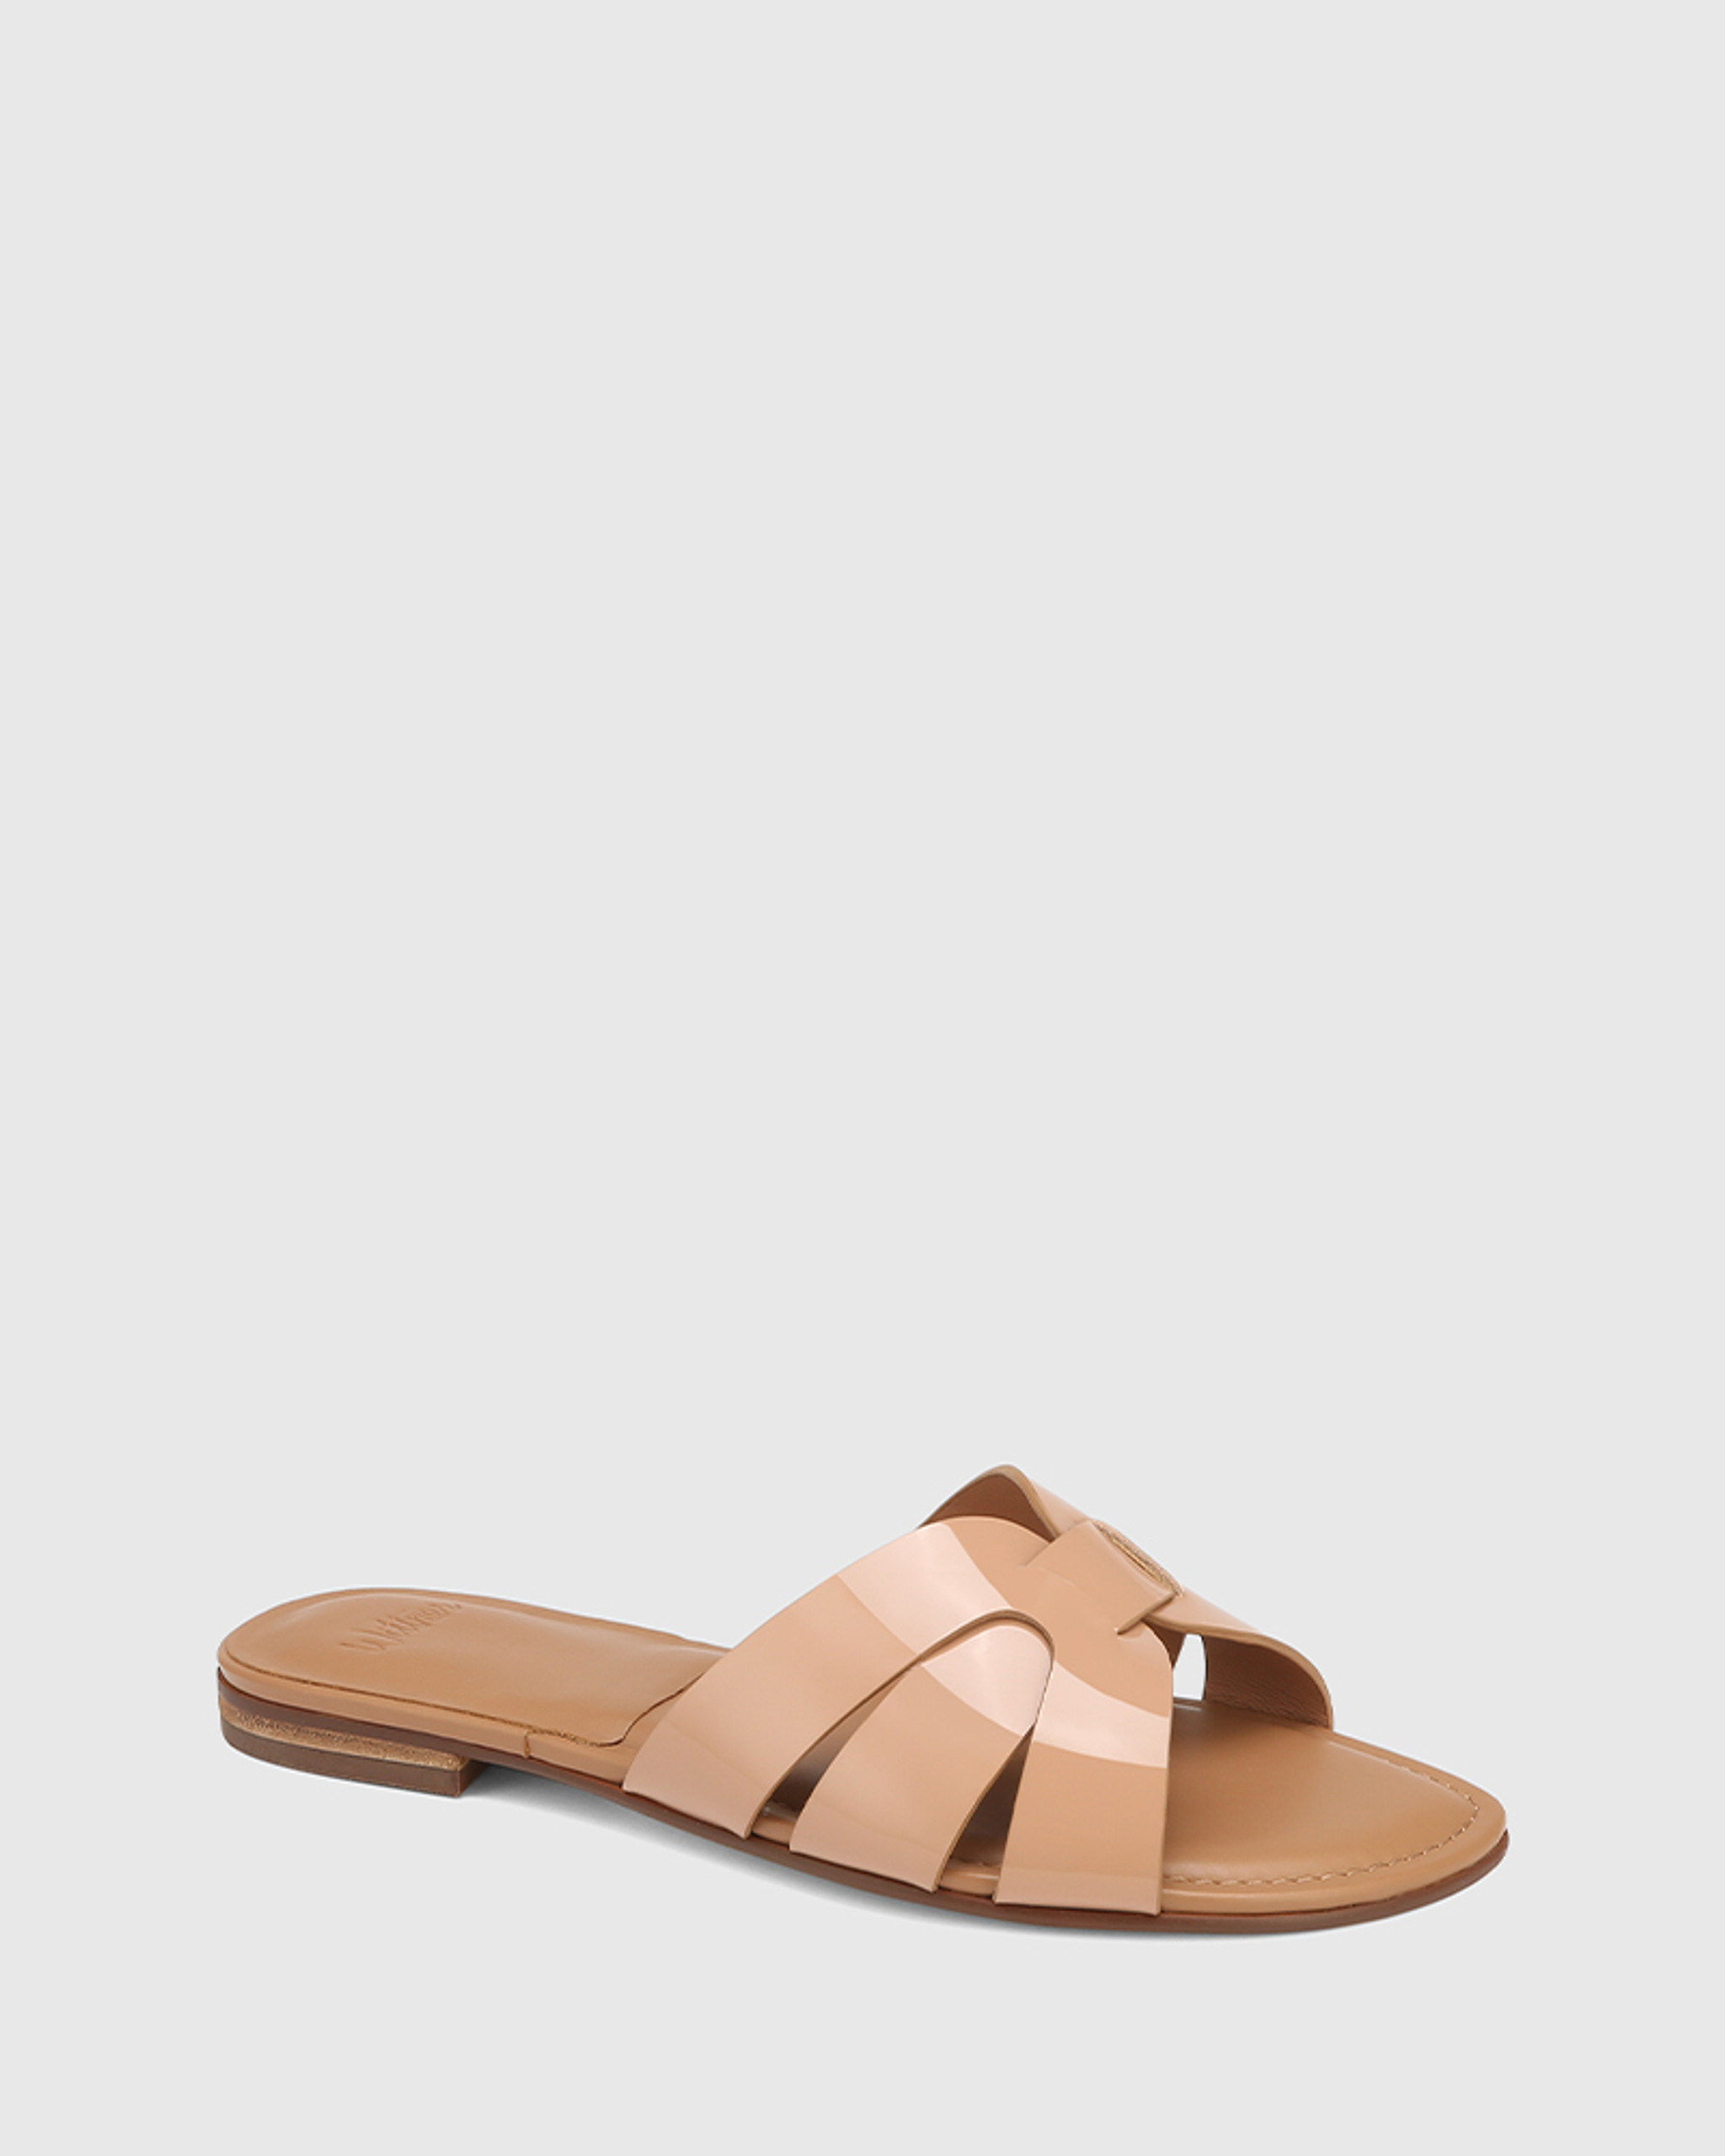 Woman's sandal in tan brown leather with strap, platform and wedge heel 12